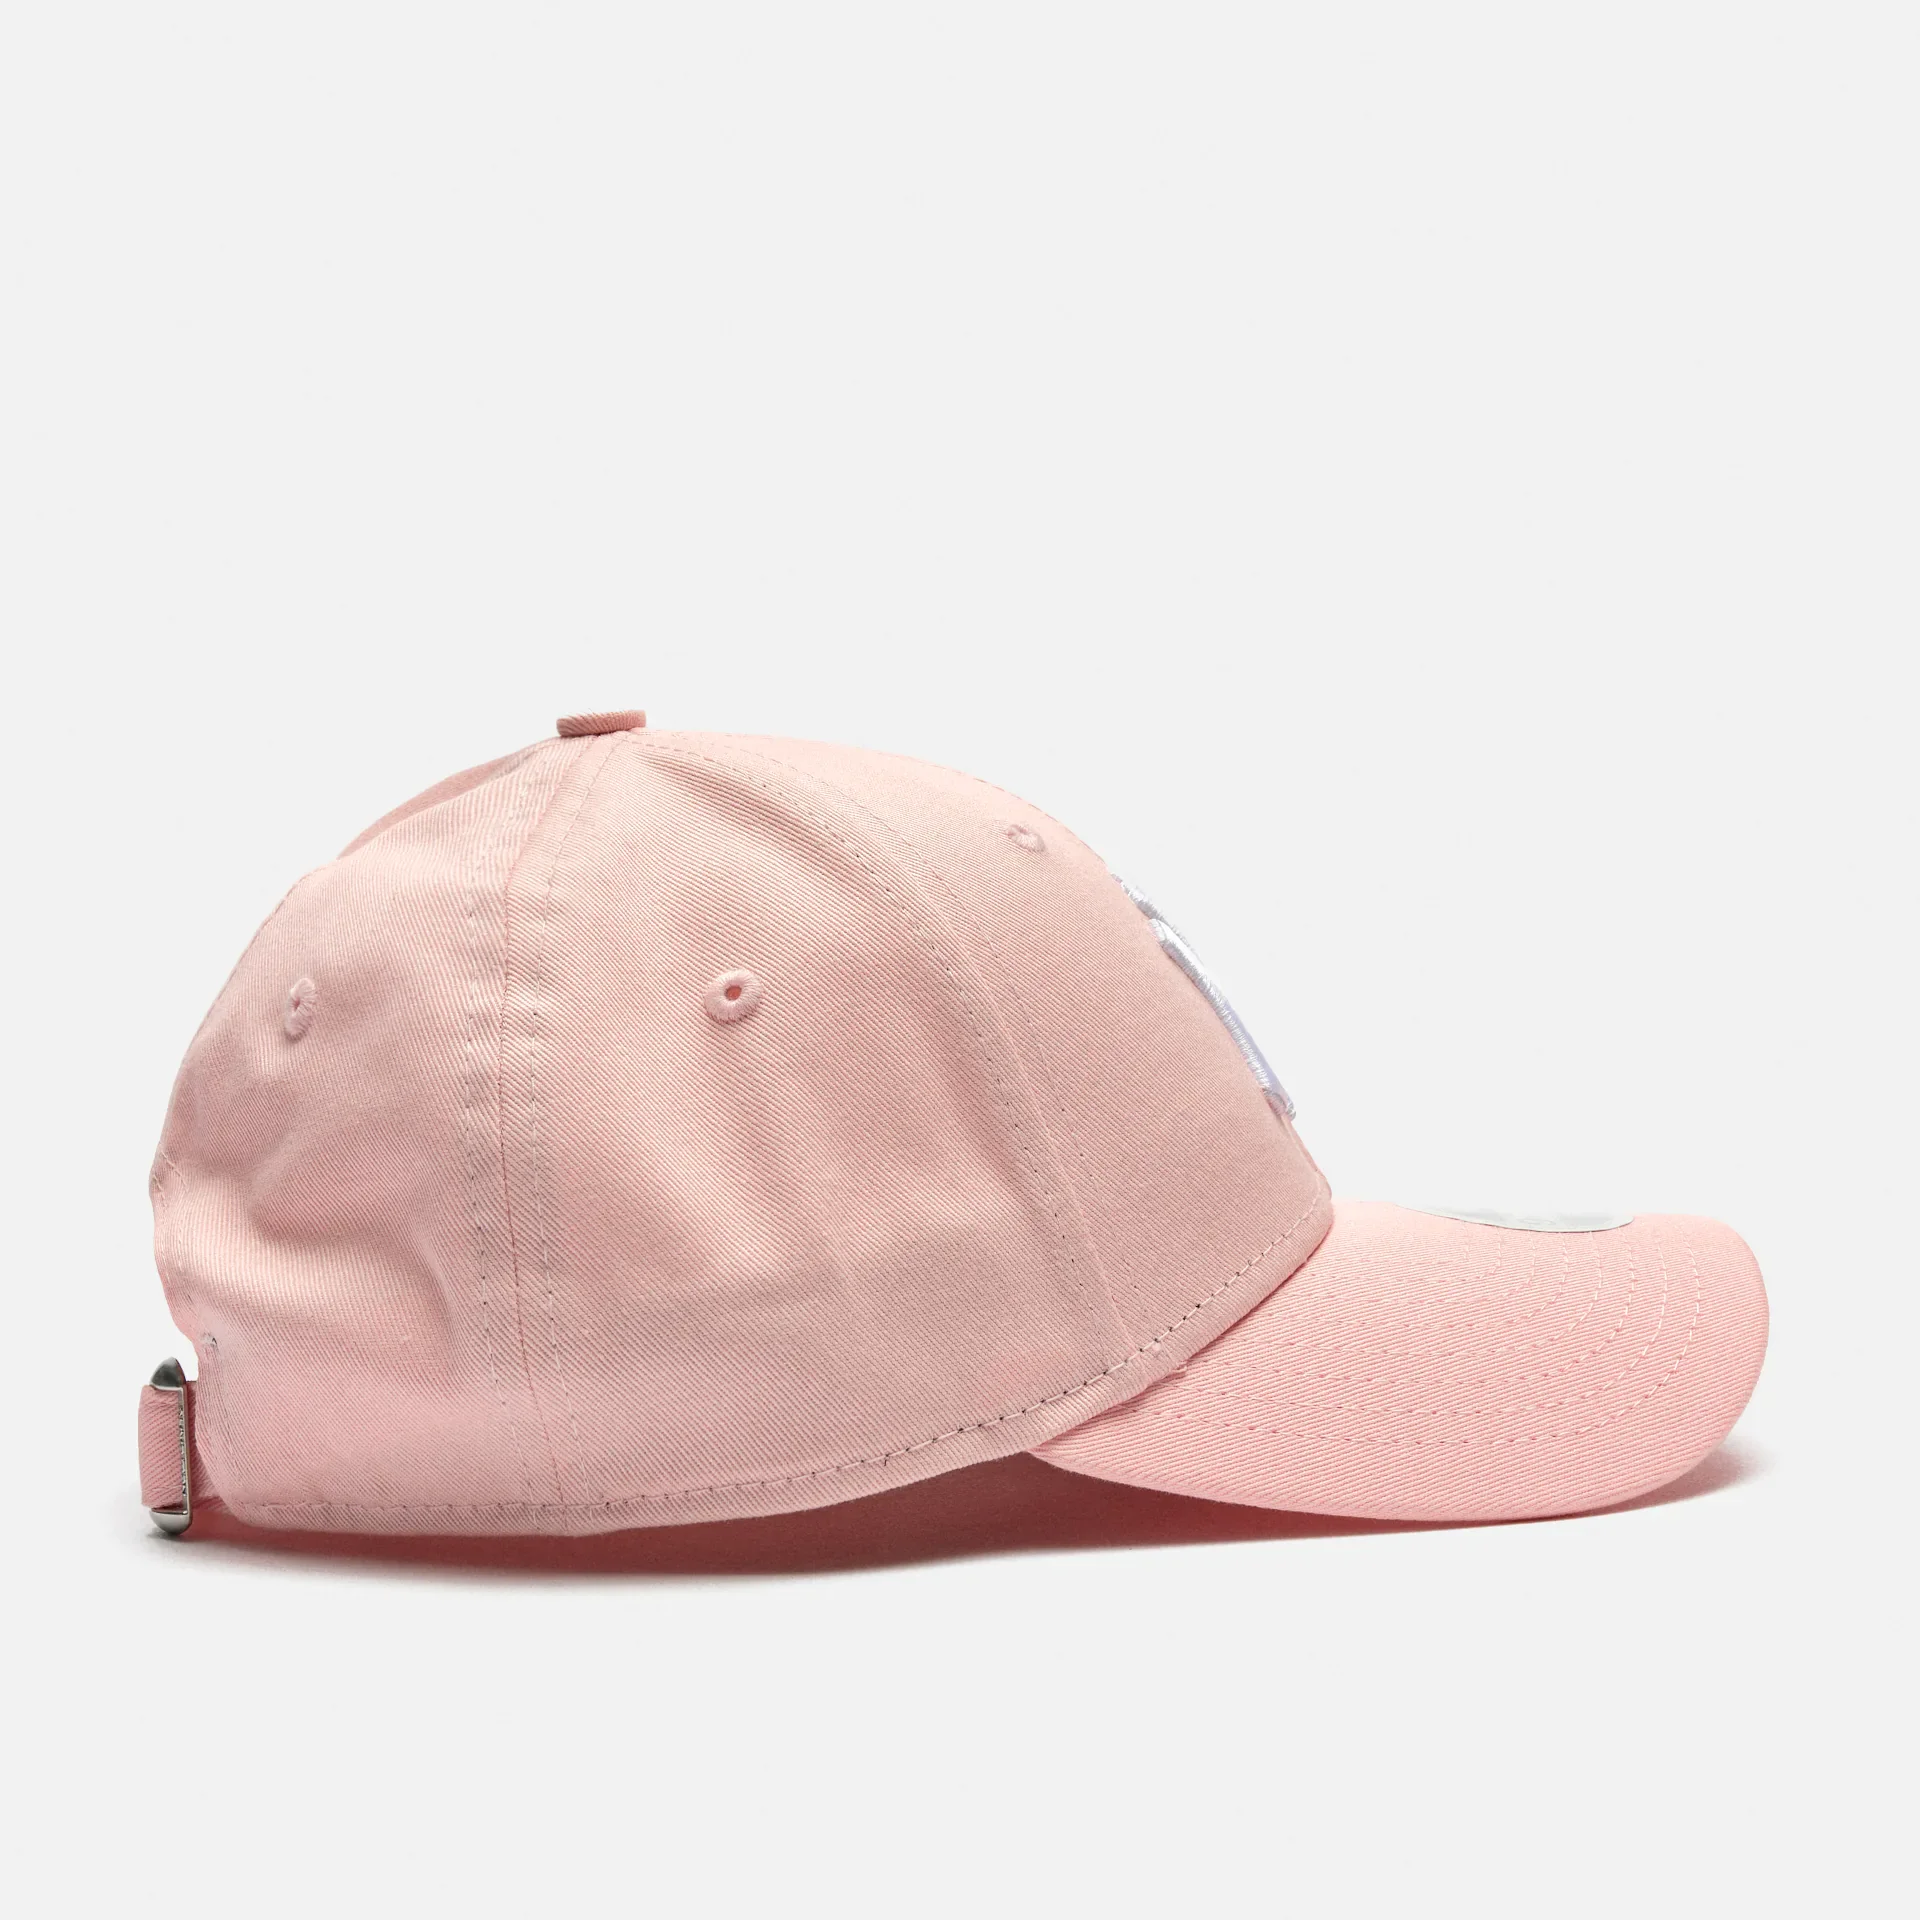 New Era Wmns League Essential NY Yankees Rose